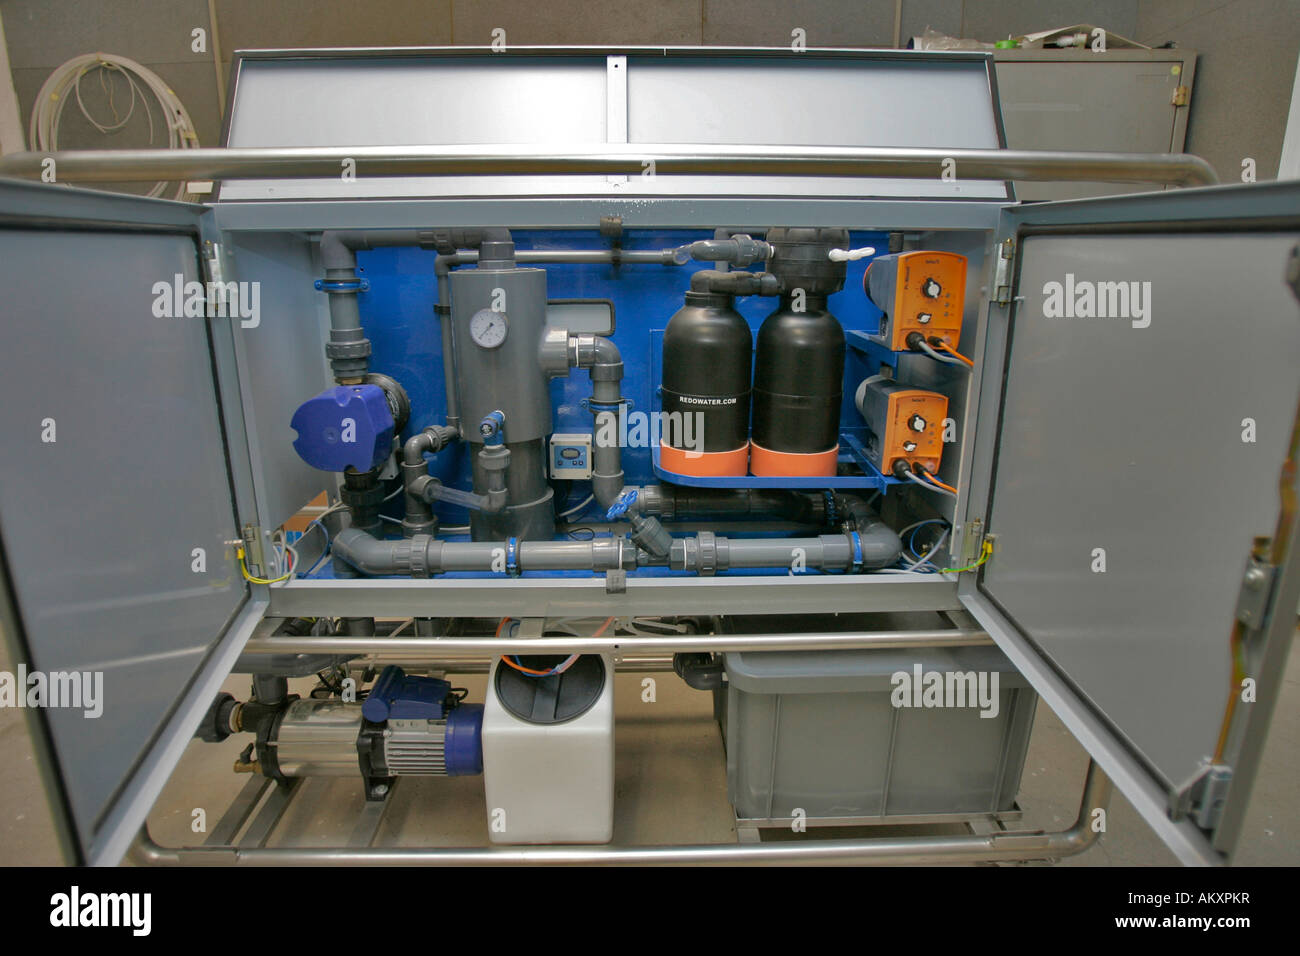 Mobile water purification system, Hessen, Germany. Stock Photo